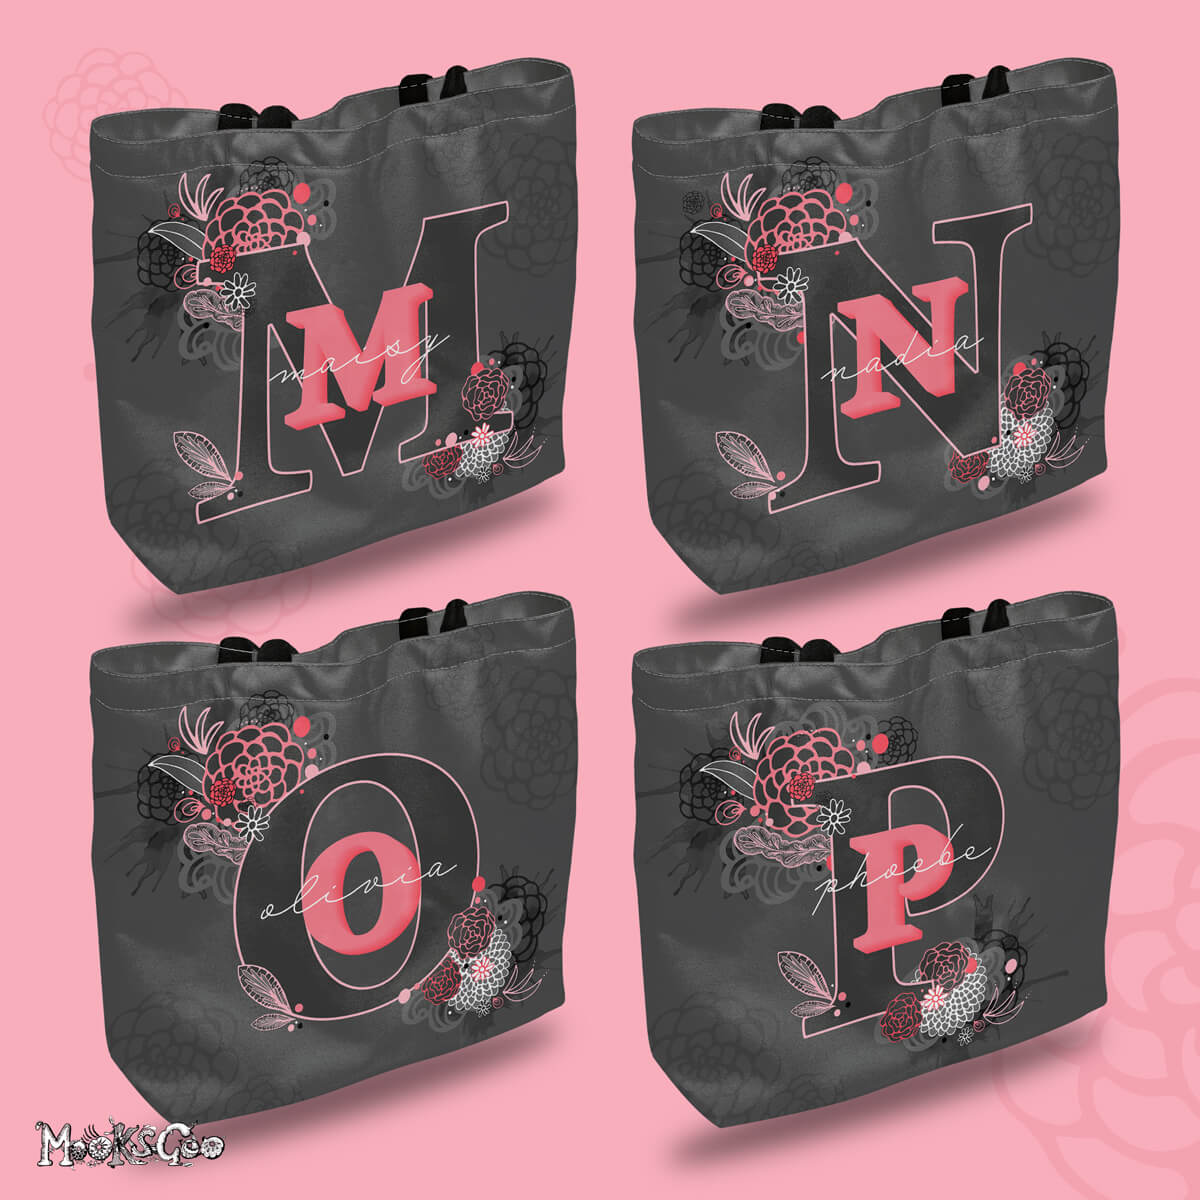 Personalised tote bag for female gifts, with the letters M for Maisy, N for Nadia, O for Olivia, P for Phoebe, designed by MooksGoo